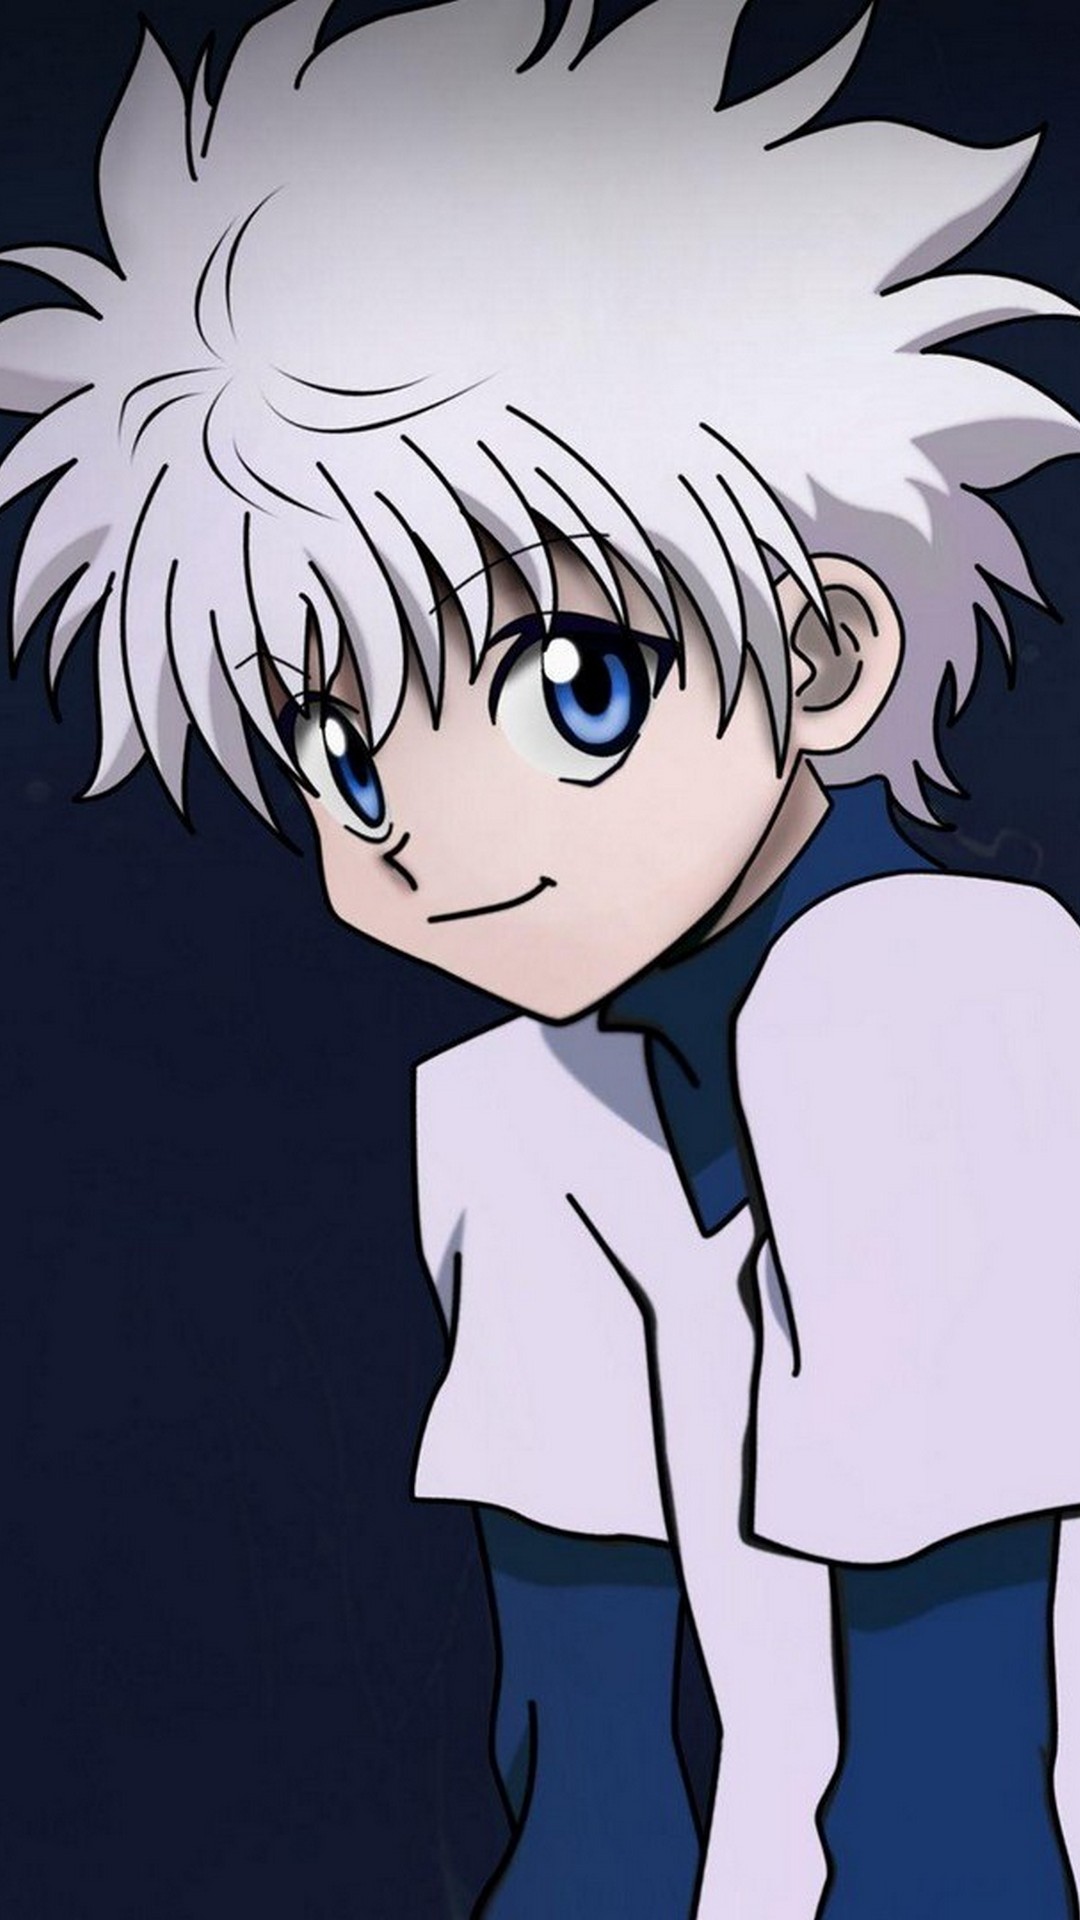 Killua Wallpaper For Phone HD with high-resolution 1080x1920 pixel. Download all Mobile Wallpapers and Use them as wallpapers for your iPhone, Tablet, iPad, Android and other mobile devices